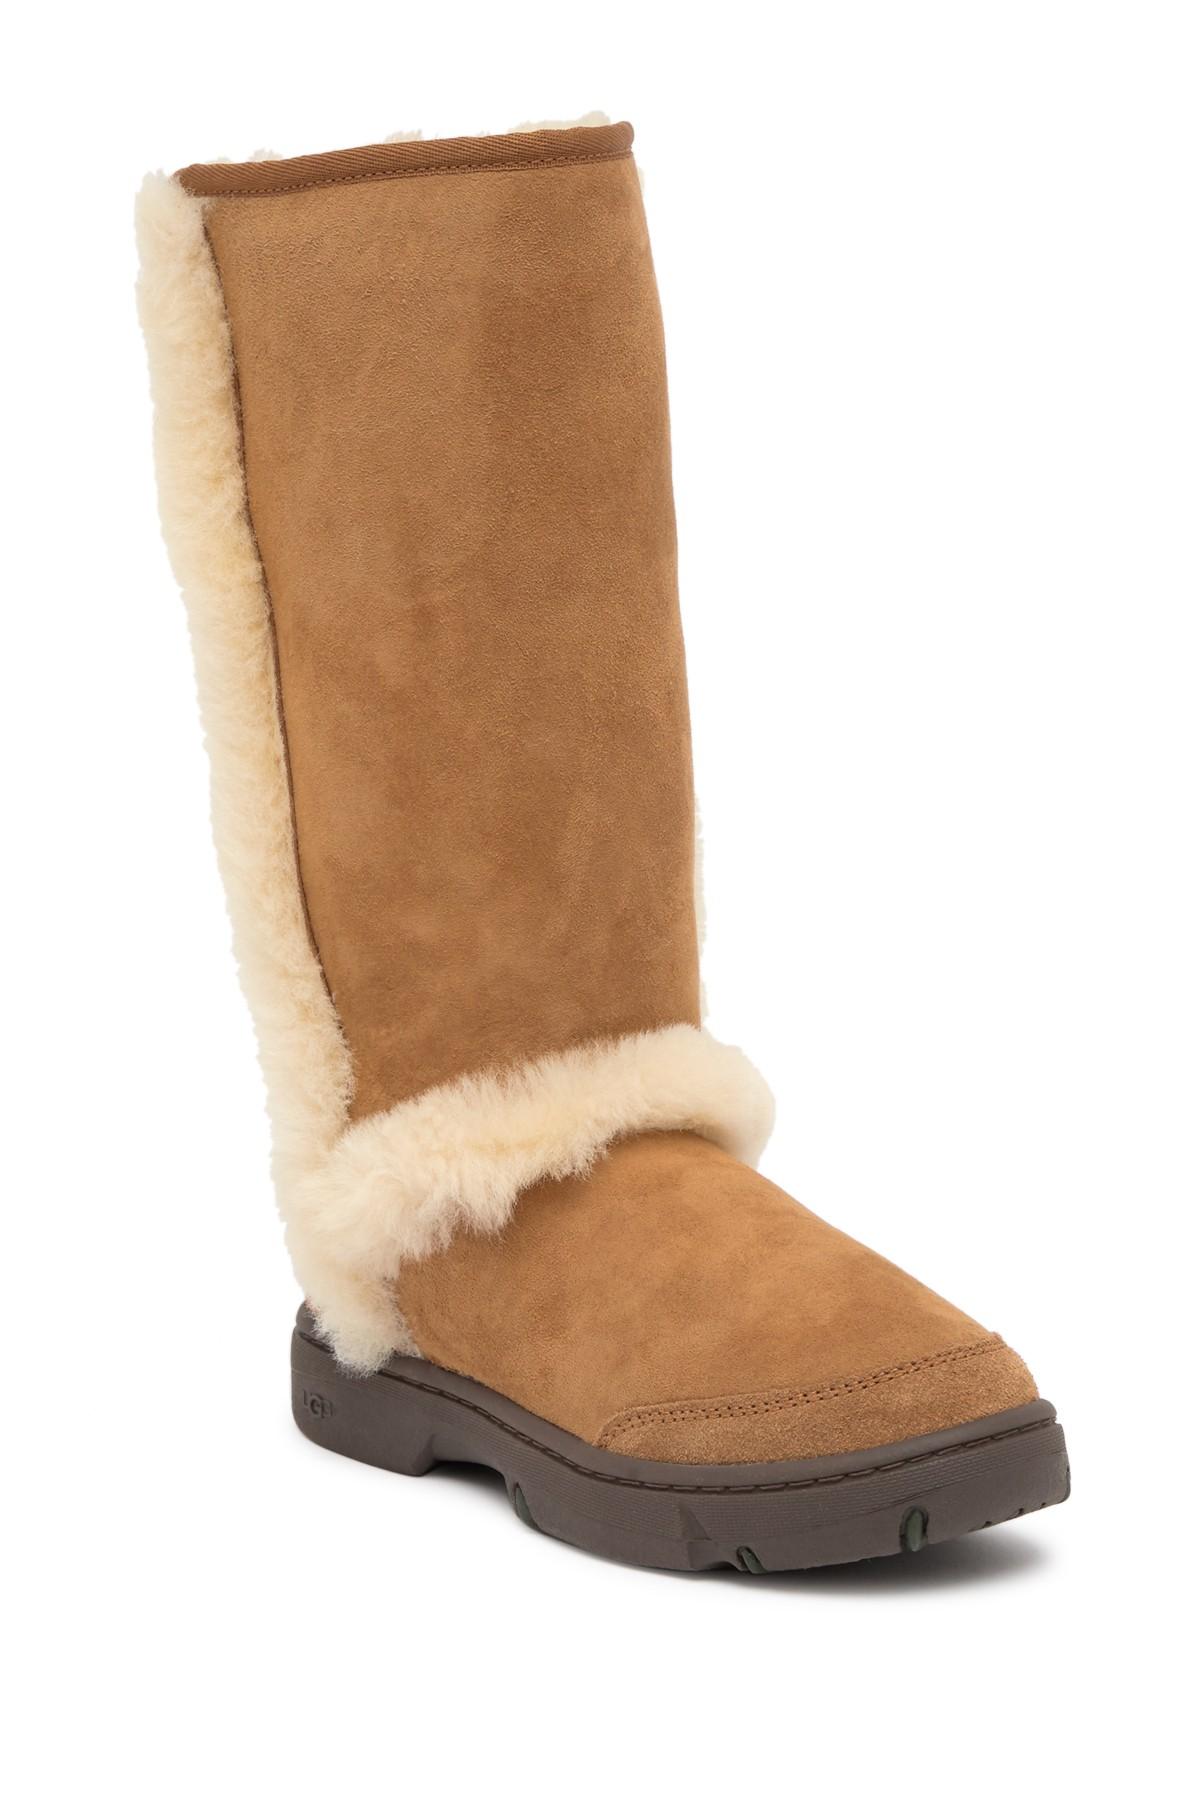 UGG Sunburst Genuine Shearling Tall Boot in Brown - Lyst